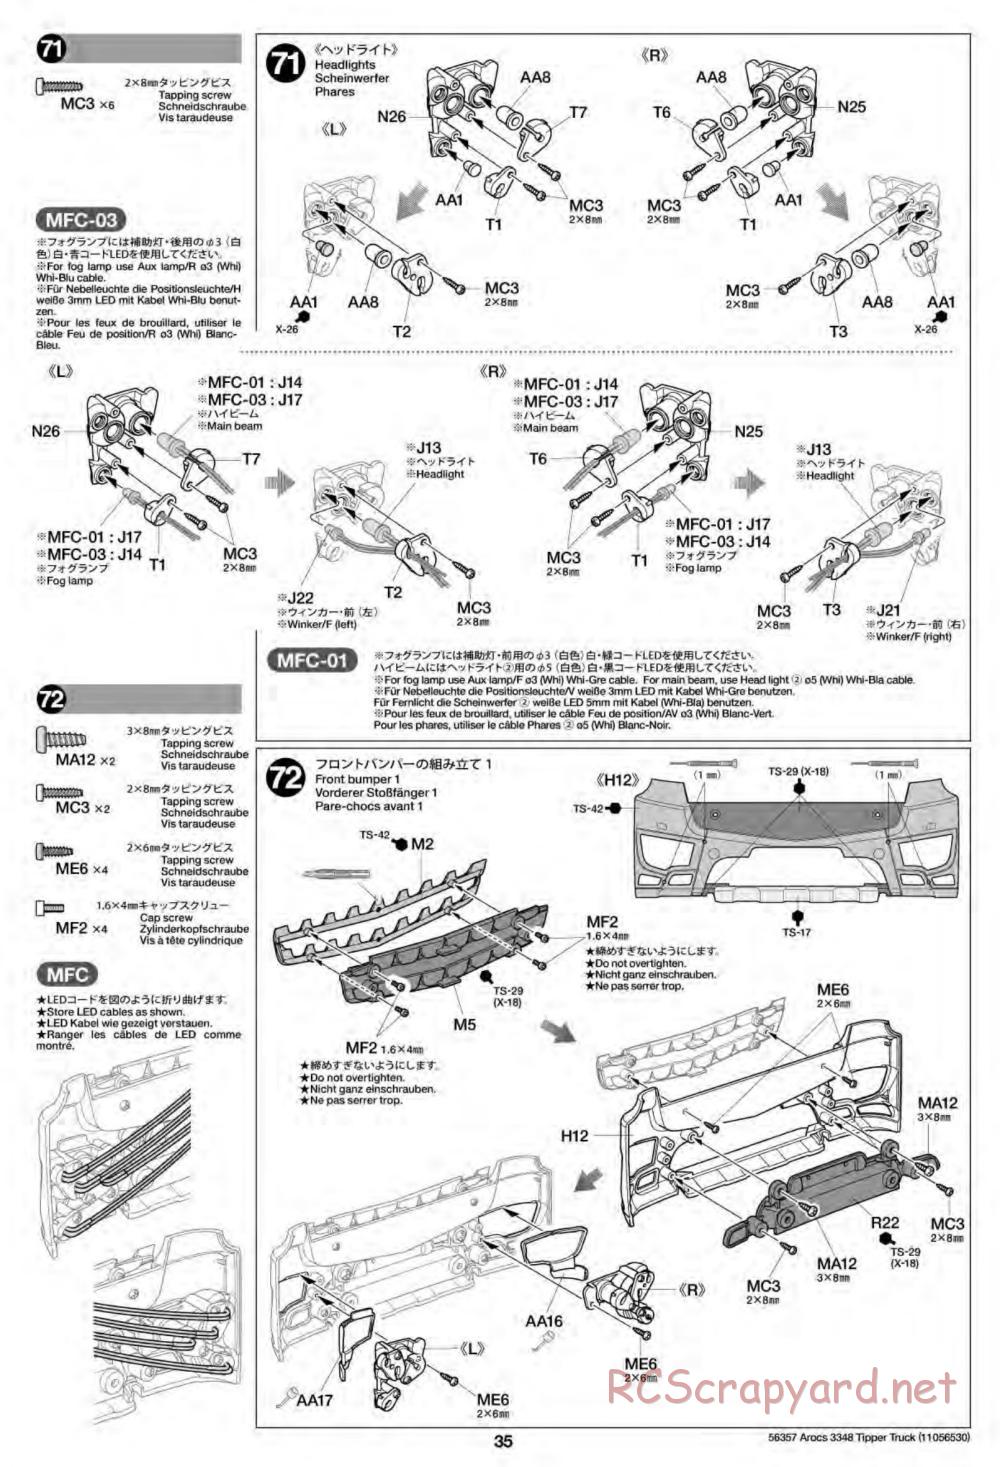 Tamiya - Mercedes-Benz Arocs 3348 6x4 Tipper Truck Chassis - Manual - Page 35